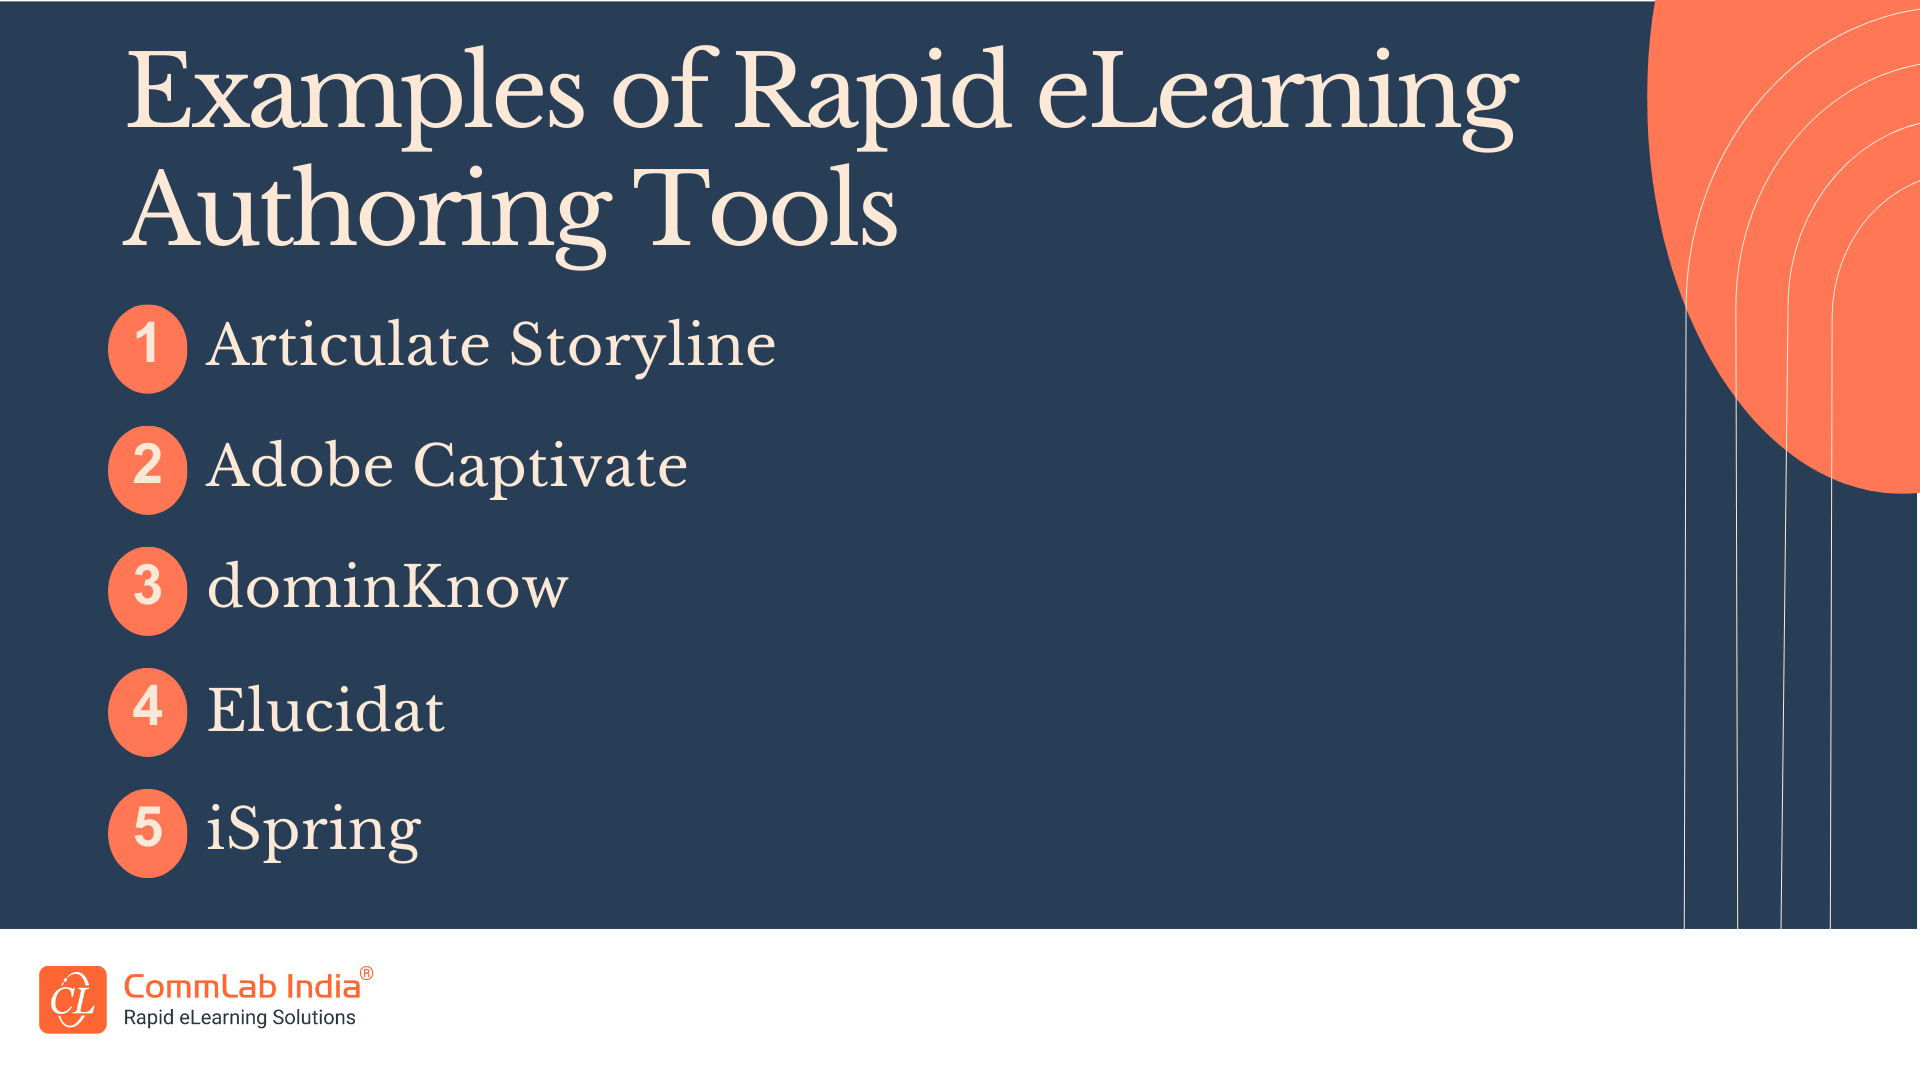 Examples of Rapid eLearning Authoring Tools